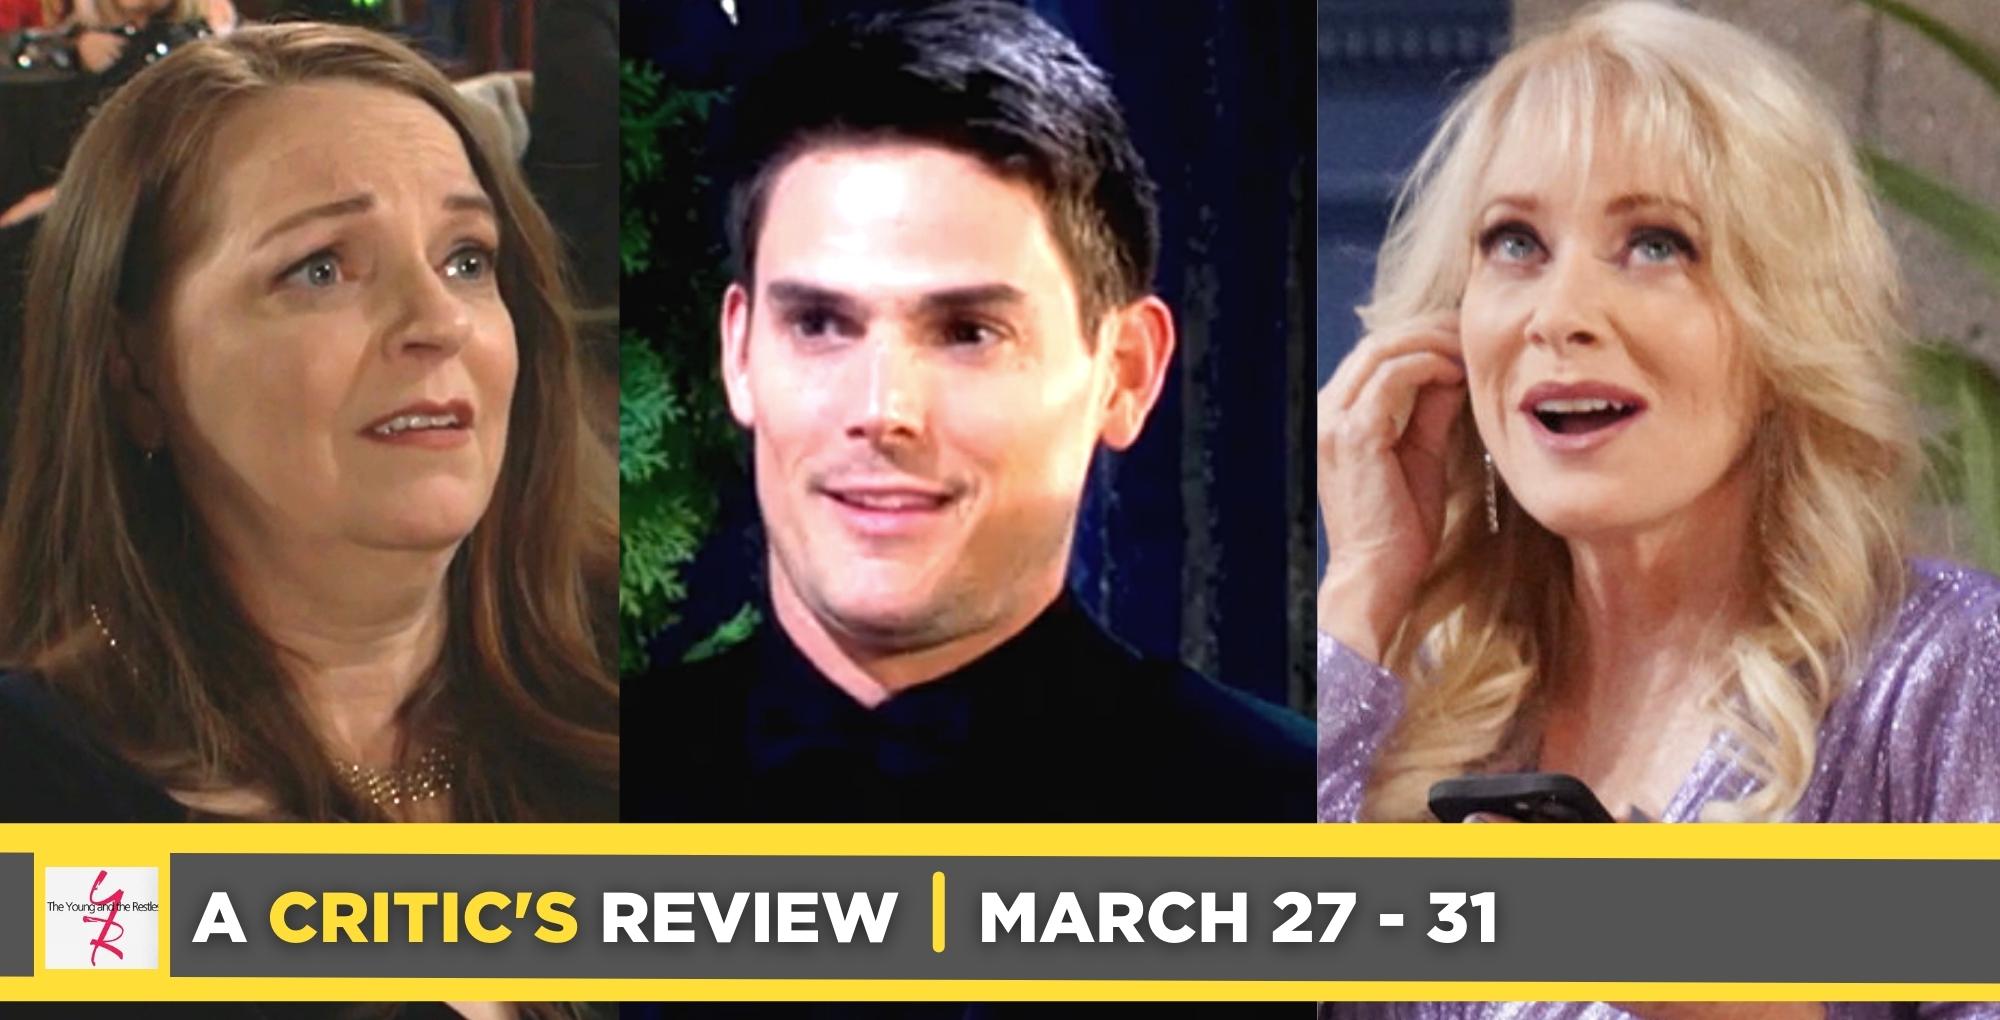 the young and the restless critic's review for march 27 – march 31, 2023, three images nina, adam, and leanna